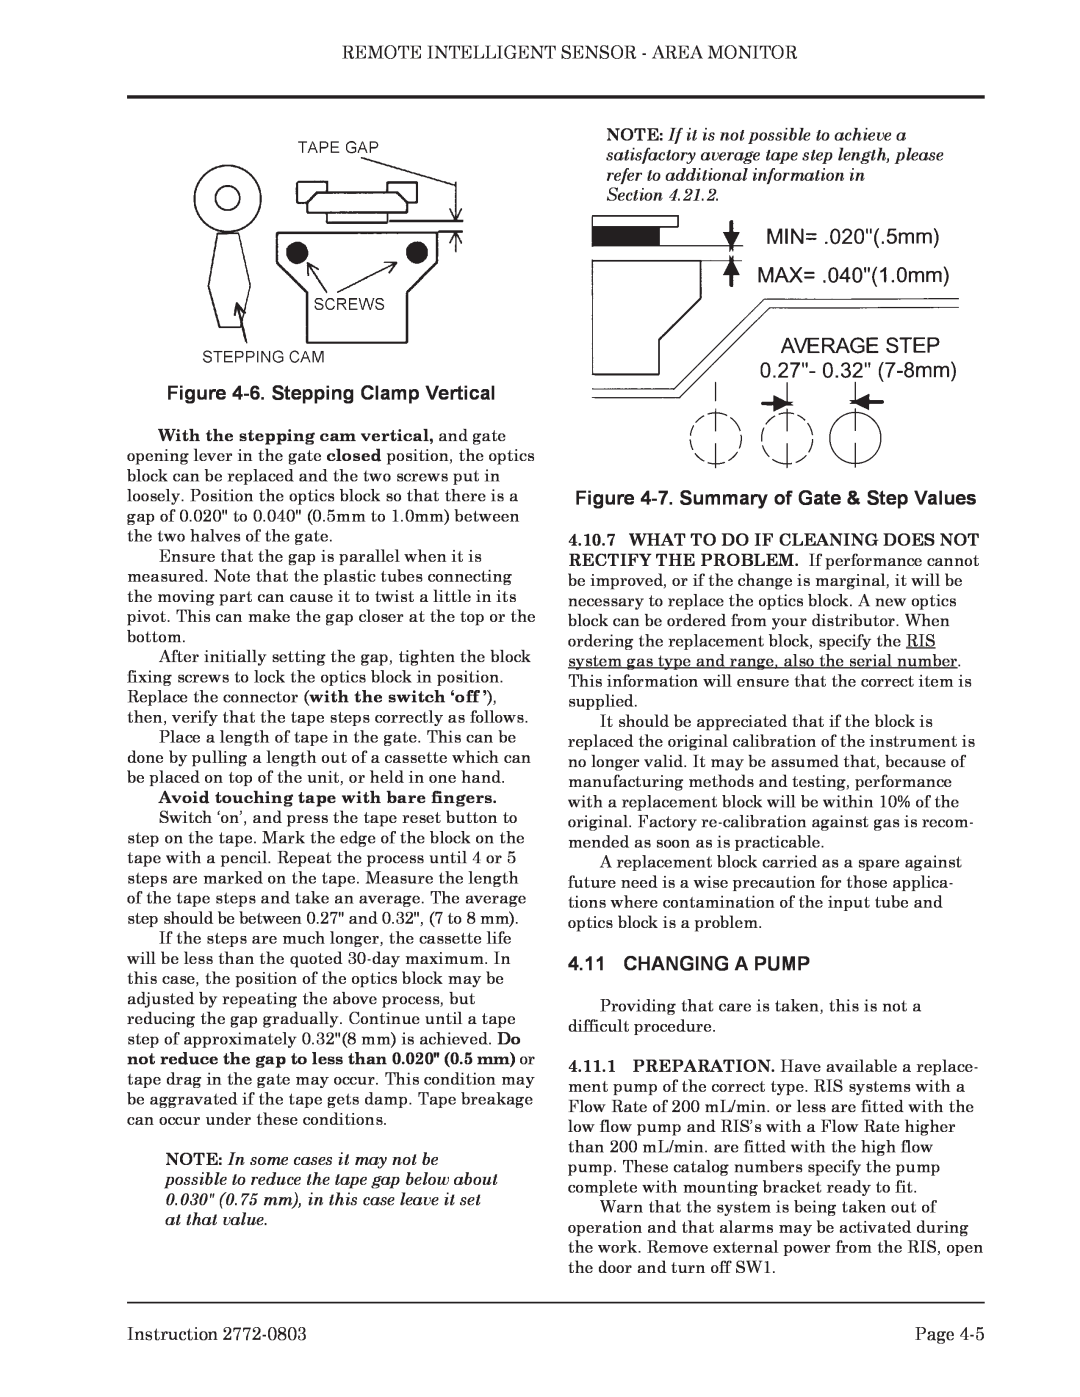 Bacharach 2772-0803 manual 6. Stepping Clamp Vertical, 7. Summary of Gate & Step Values, Changing A Pump 